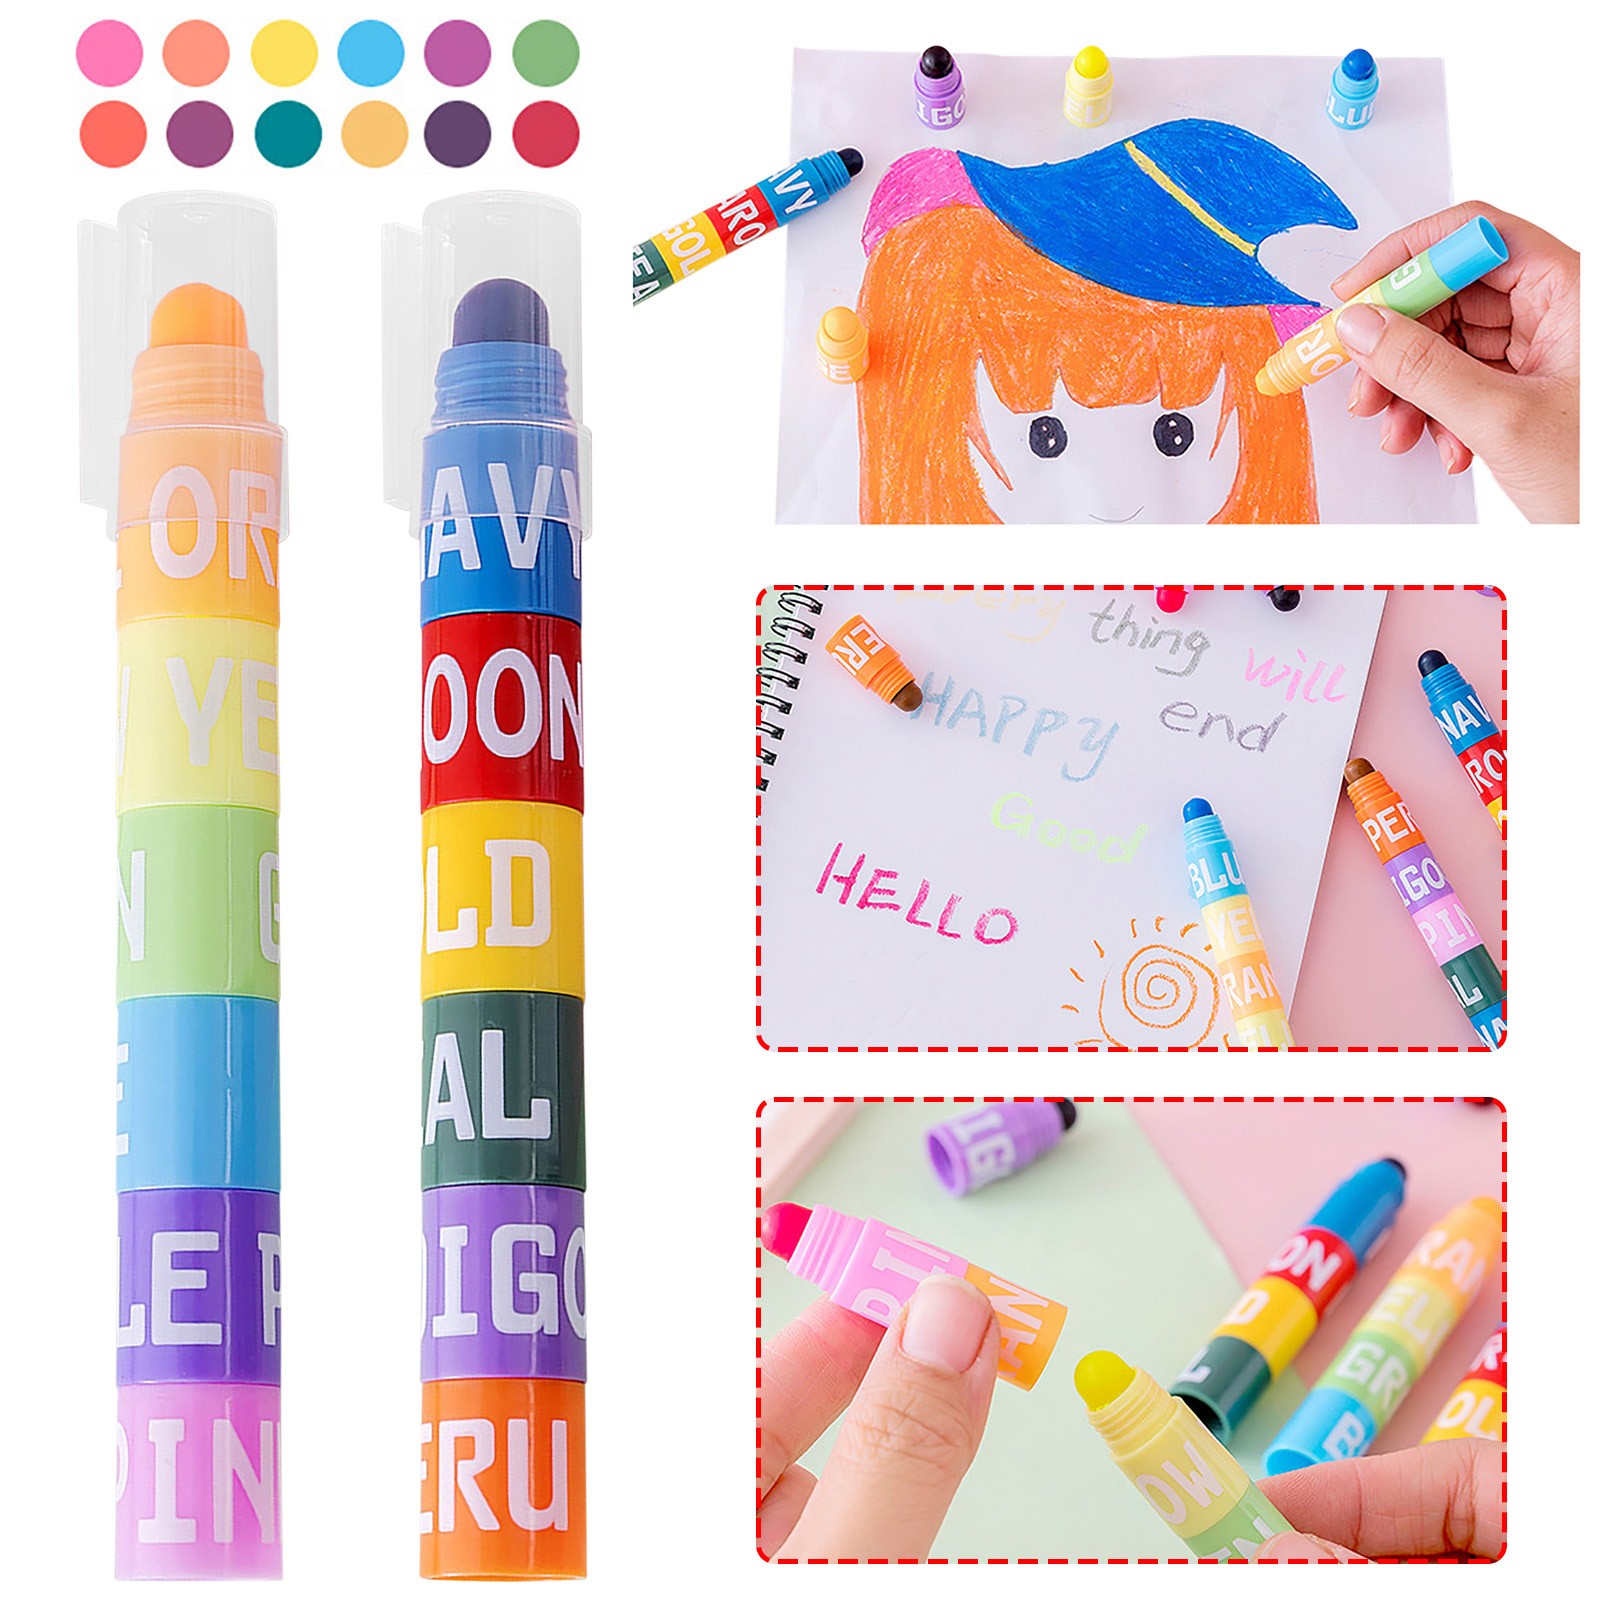 WEPRO Students Color Color-changing Pens Use Crayons Markers With Colorful  Creative 6 Office Stationery 